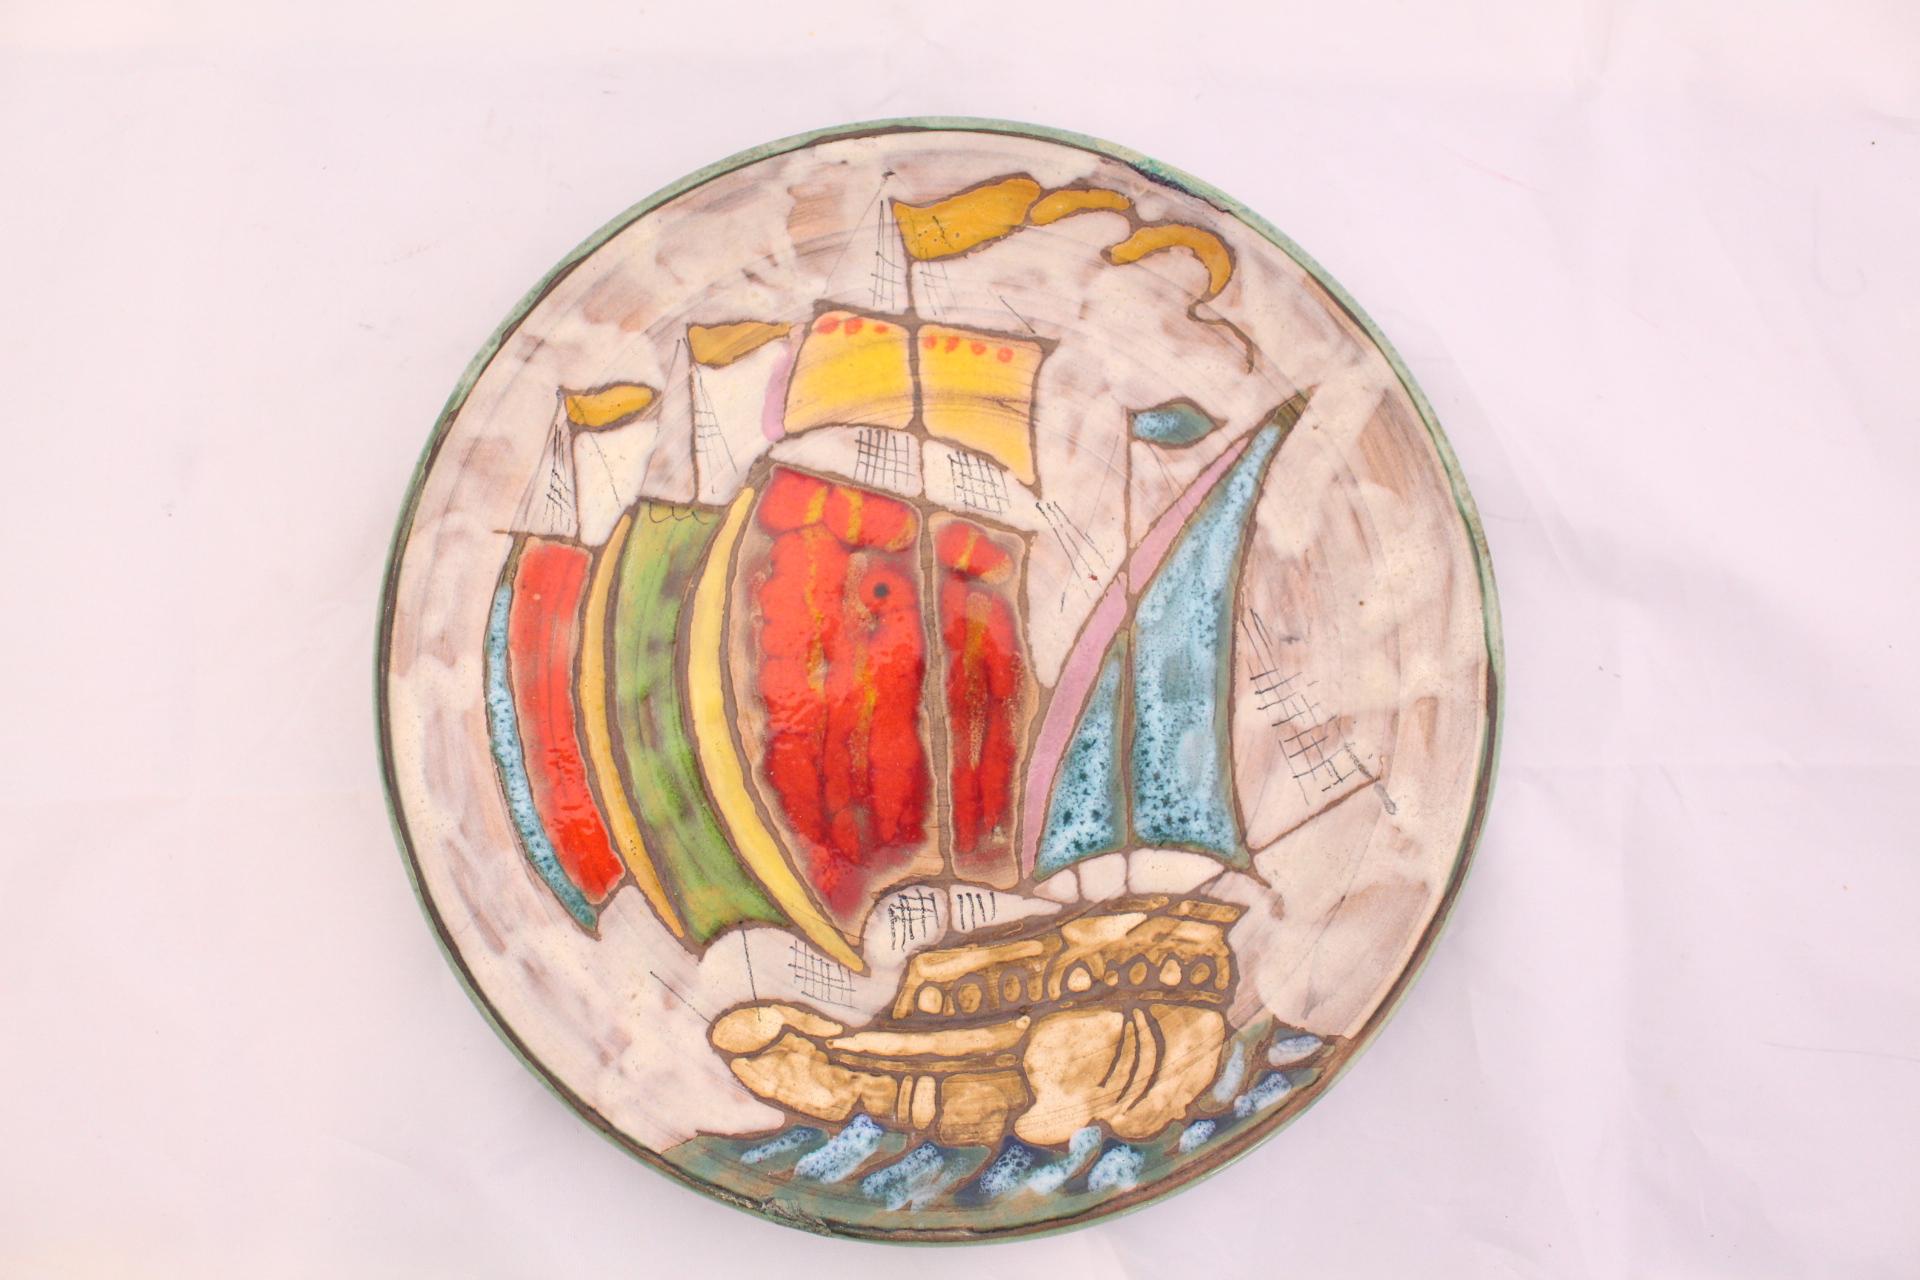 Midcentury plate unique Vallauris hand painted
Stylised Galleon at Sea 
Stylish and decorative great addition to Provençal collection of Art Studio Pottery 
Good condition with two small old restorations to the edge please see photos.
 